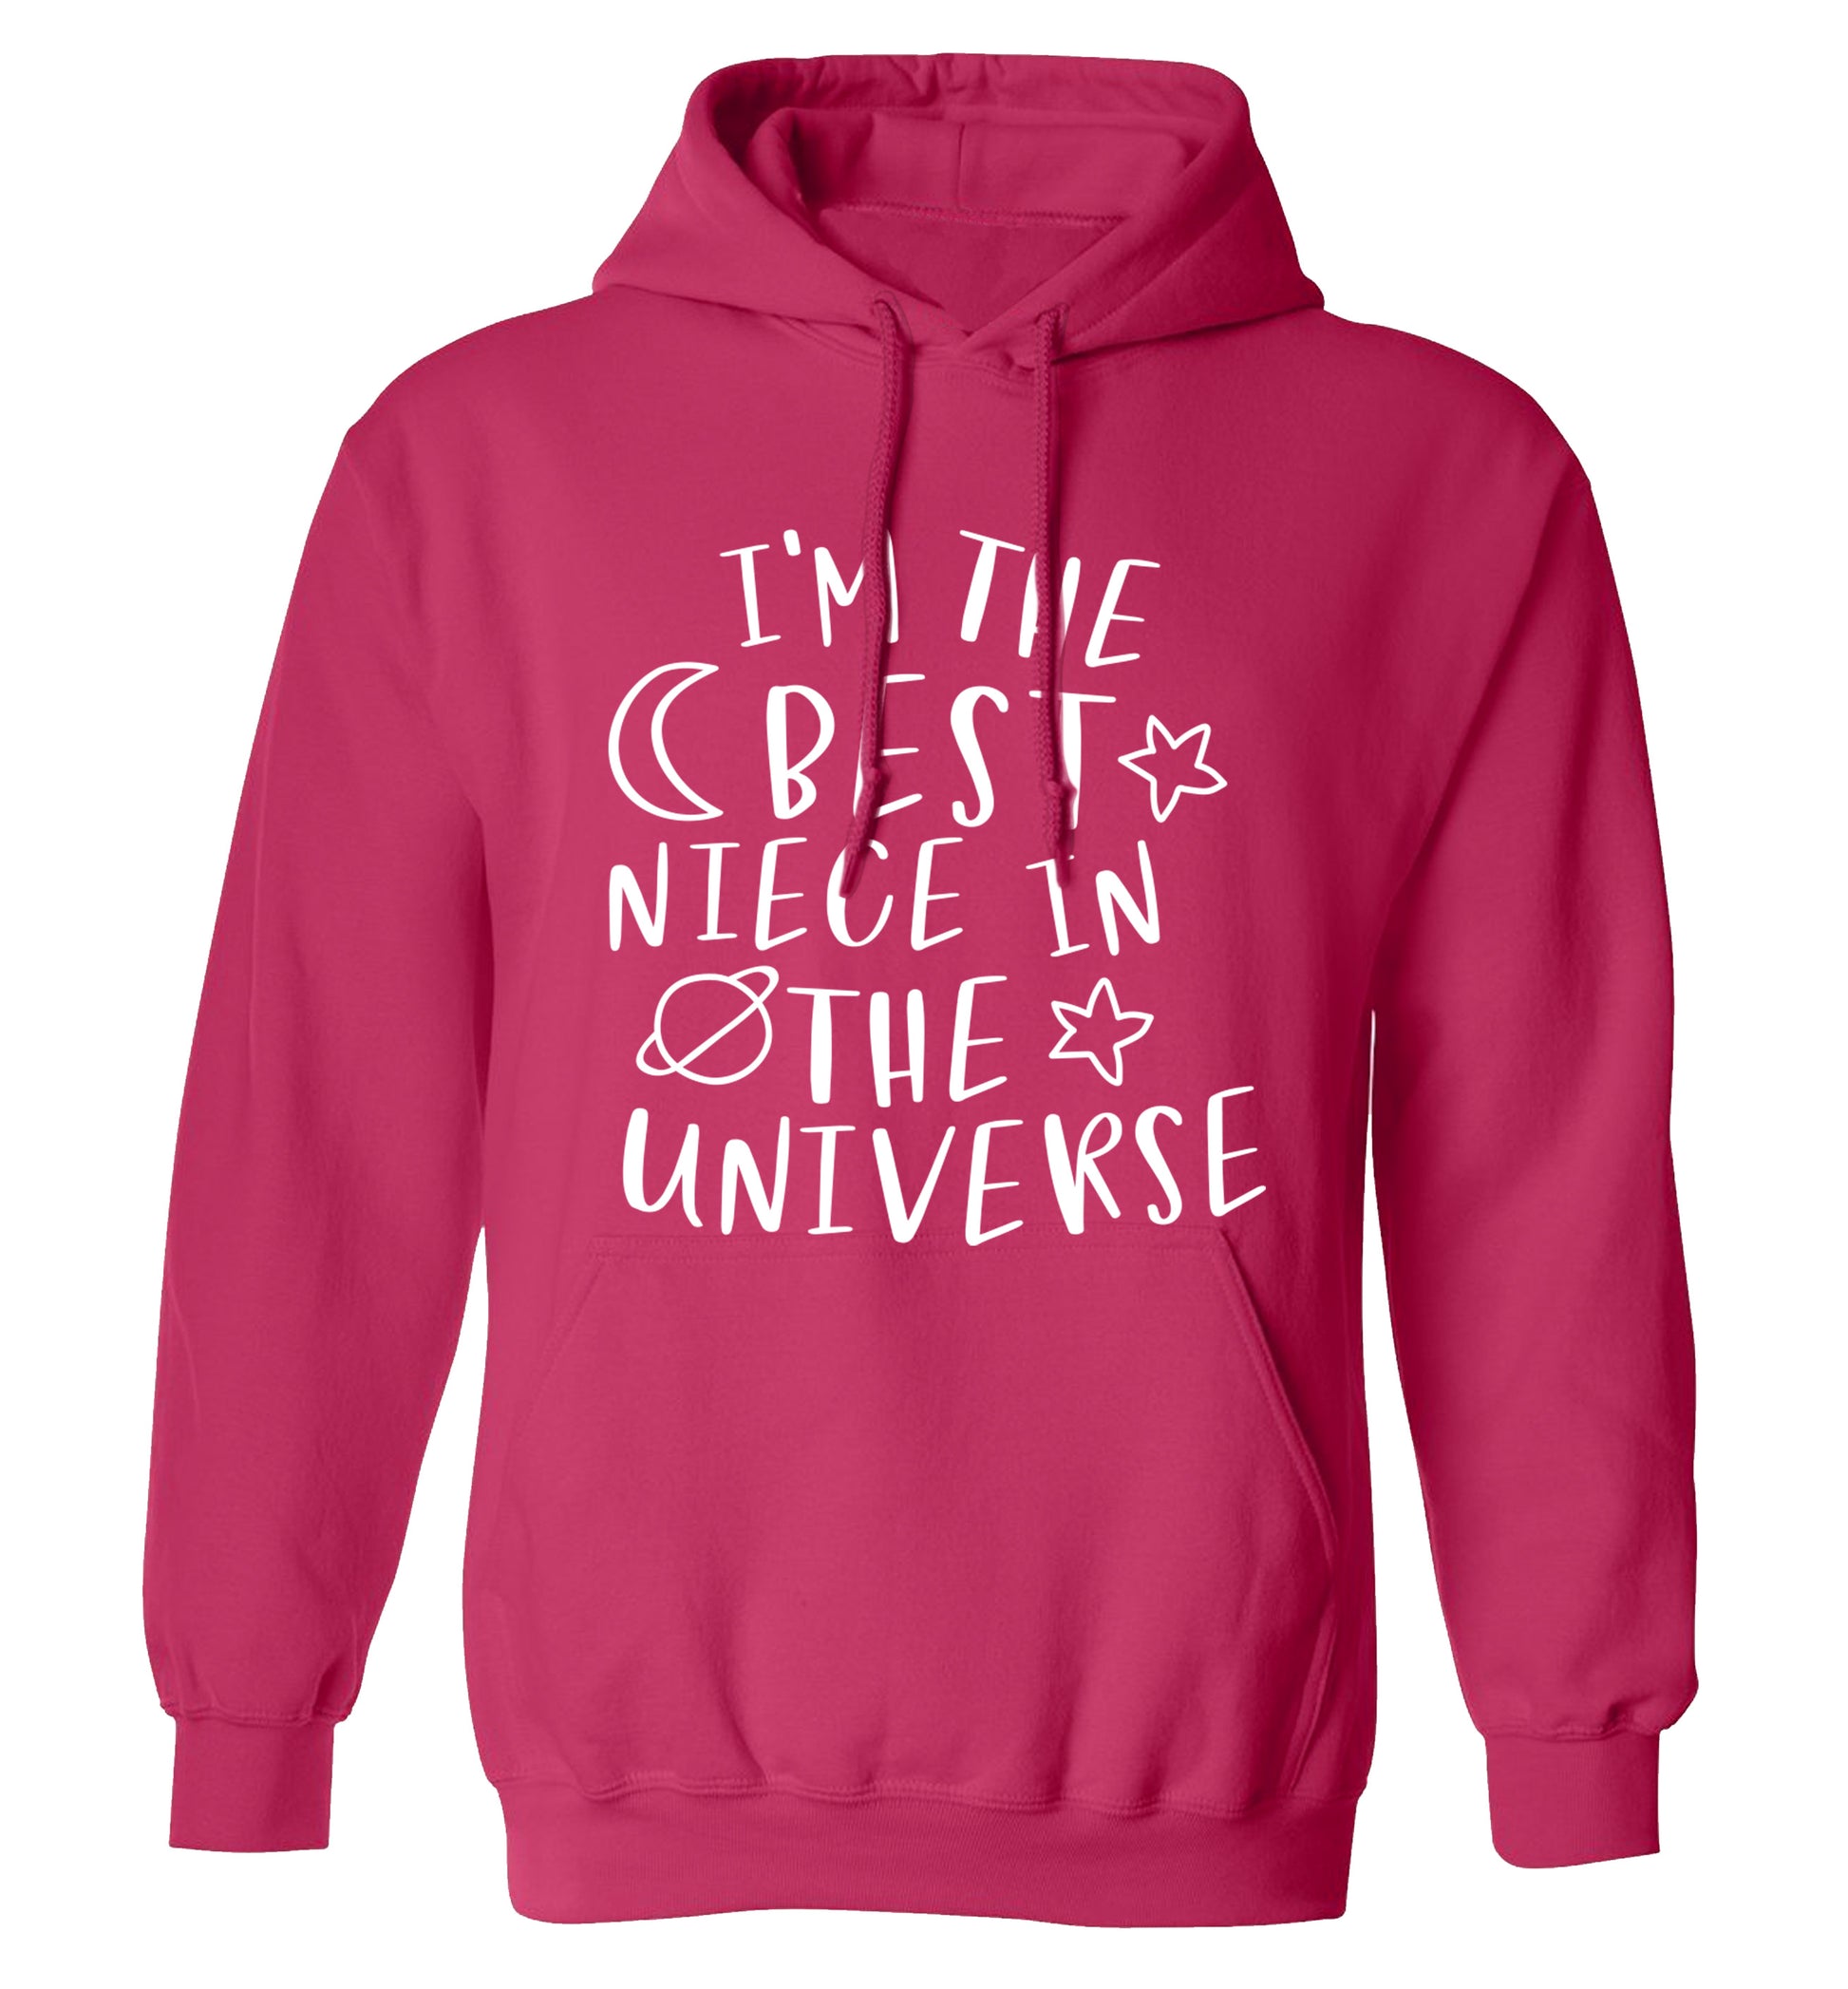 I'm the best niece in the universe adults unisex pink hoodie 2XL